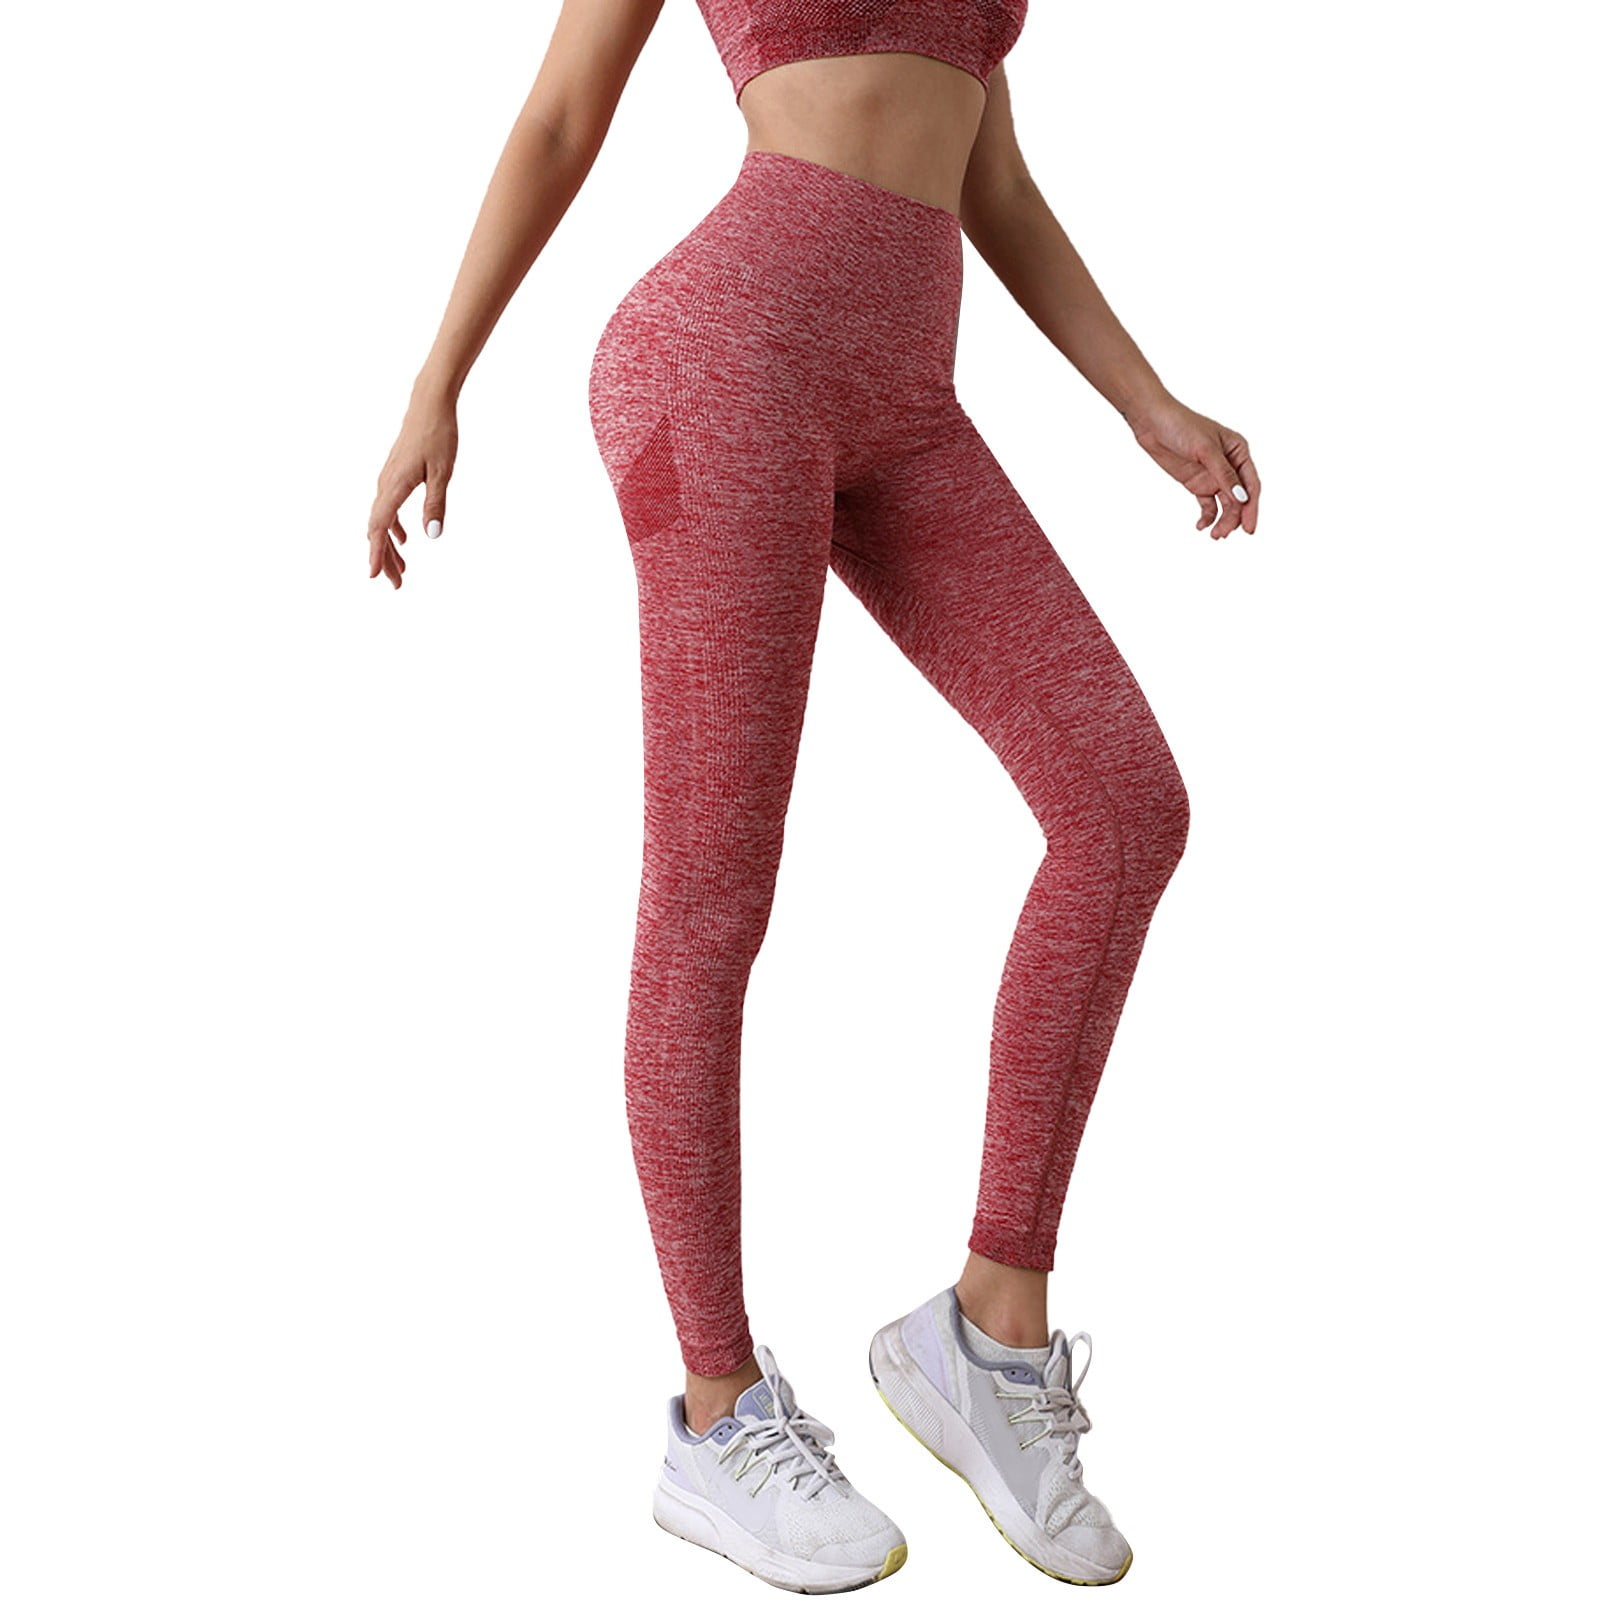 2DXuixsh All Yoga Pants Pants Yoga Fitness Cropped Leggings Sports Womens  3D Print Workout Pants Dark Yoga Pants with Pockets for Women Polyester()